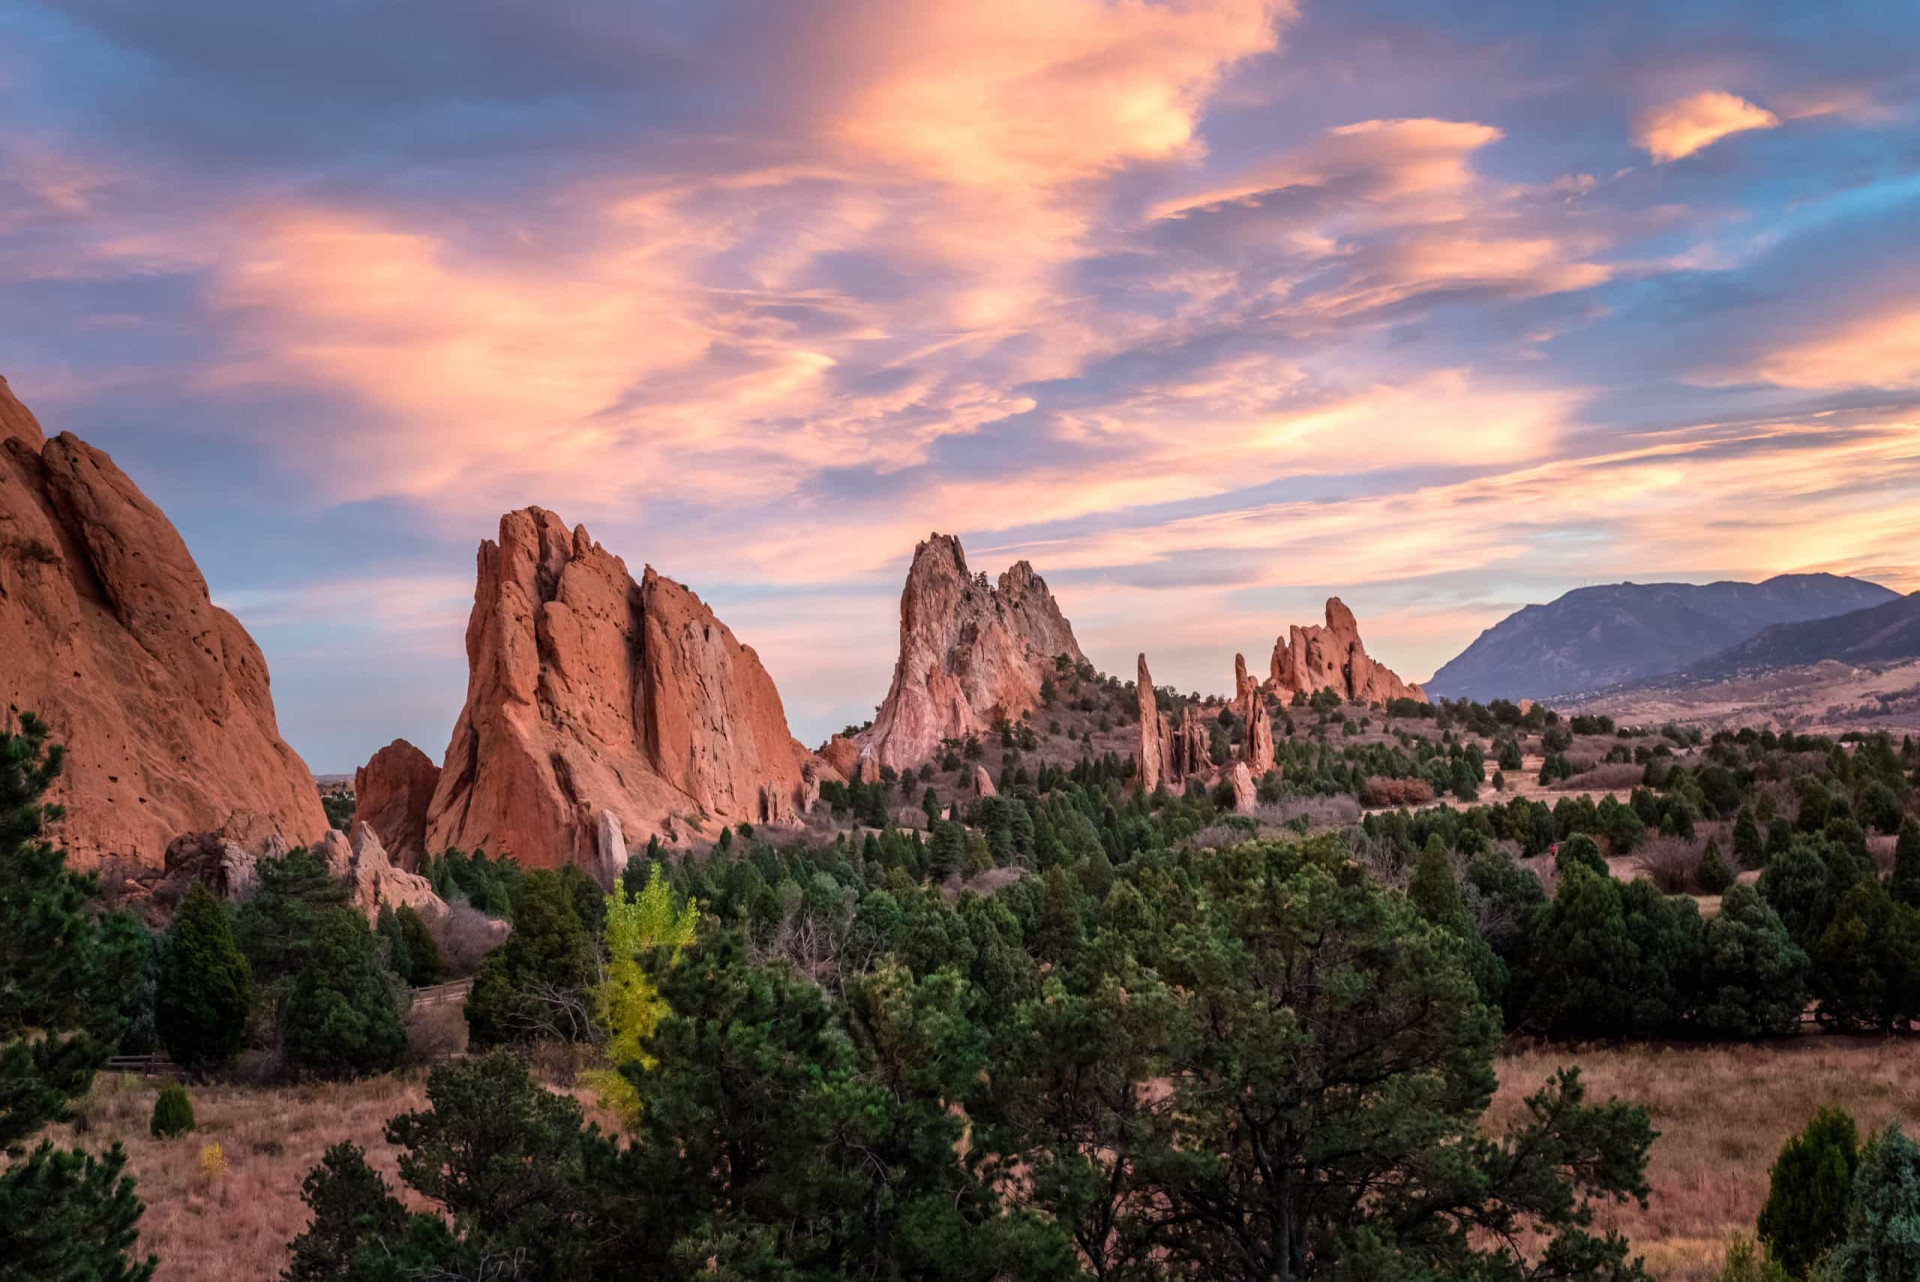 <p>A registered National Natural Landmark, the collection of incredible sandstone rock formations situated near the city are suitably named the Garden of the Gods.</p><p><a href="https://www.msn.com/en-us/community/channel/vid-7xx8mnucu55yw63we9va2gwr7uihbxwc68fxqp25x6tg4ftibpra?cvid=94631541bc0f4f89bfd59158d696ad7e">Follow us and access great exclusive content every day</a></p>